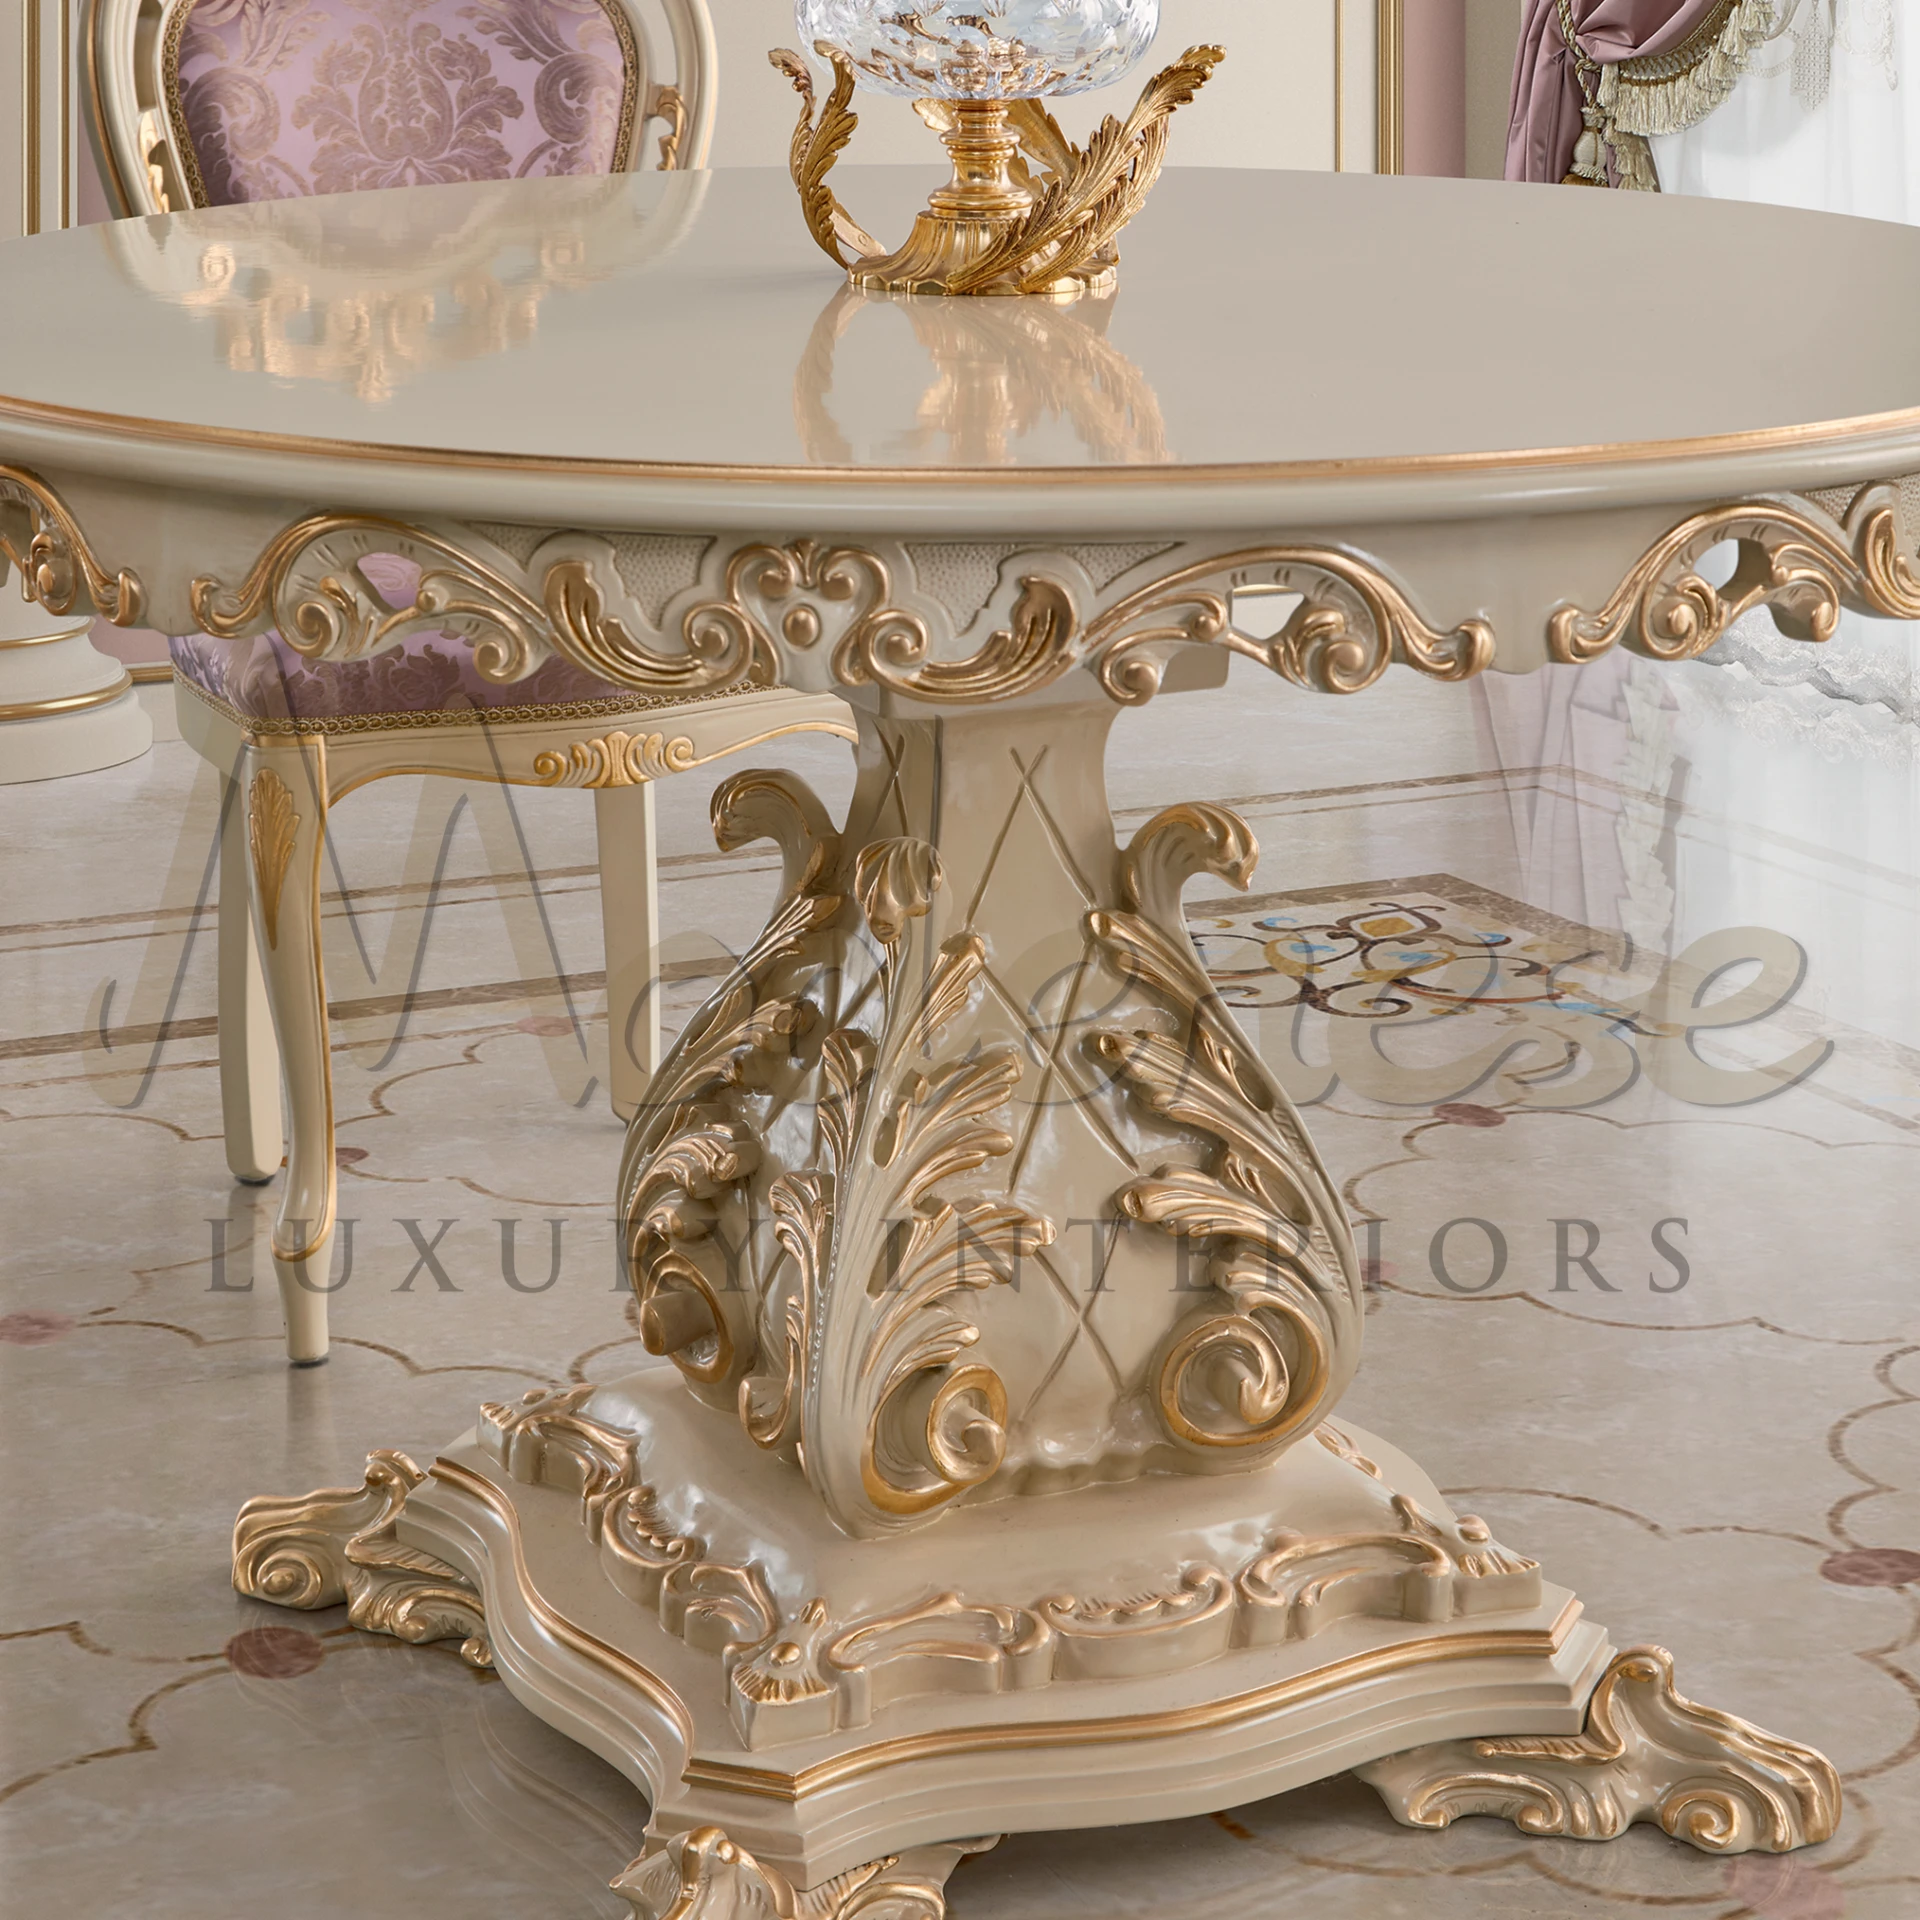 Classic side table in Rococo style, hand-gilded with gold leaf, showcasing Italian craftsmanship for luxury home decor.